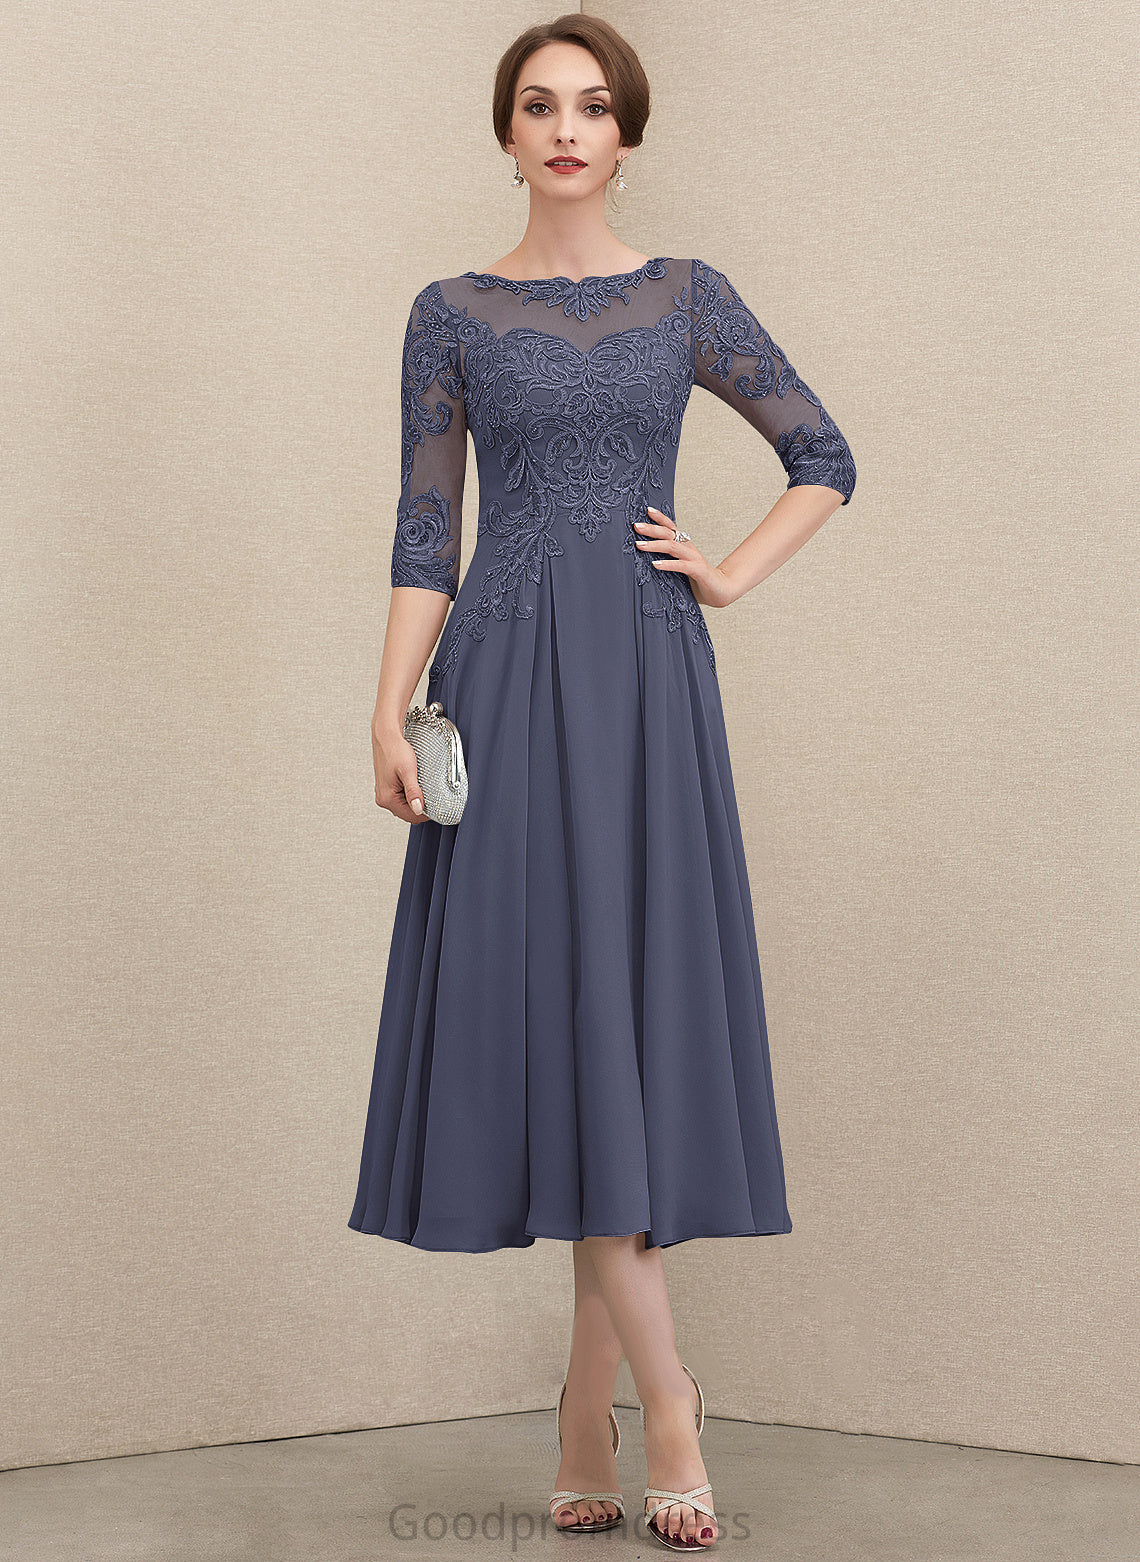 Lace Neck Dresses Chiffon Formal Dresses A-line Isis Round